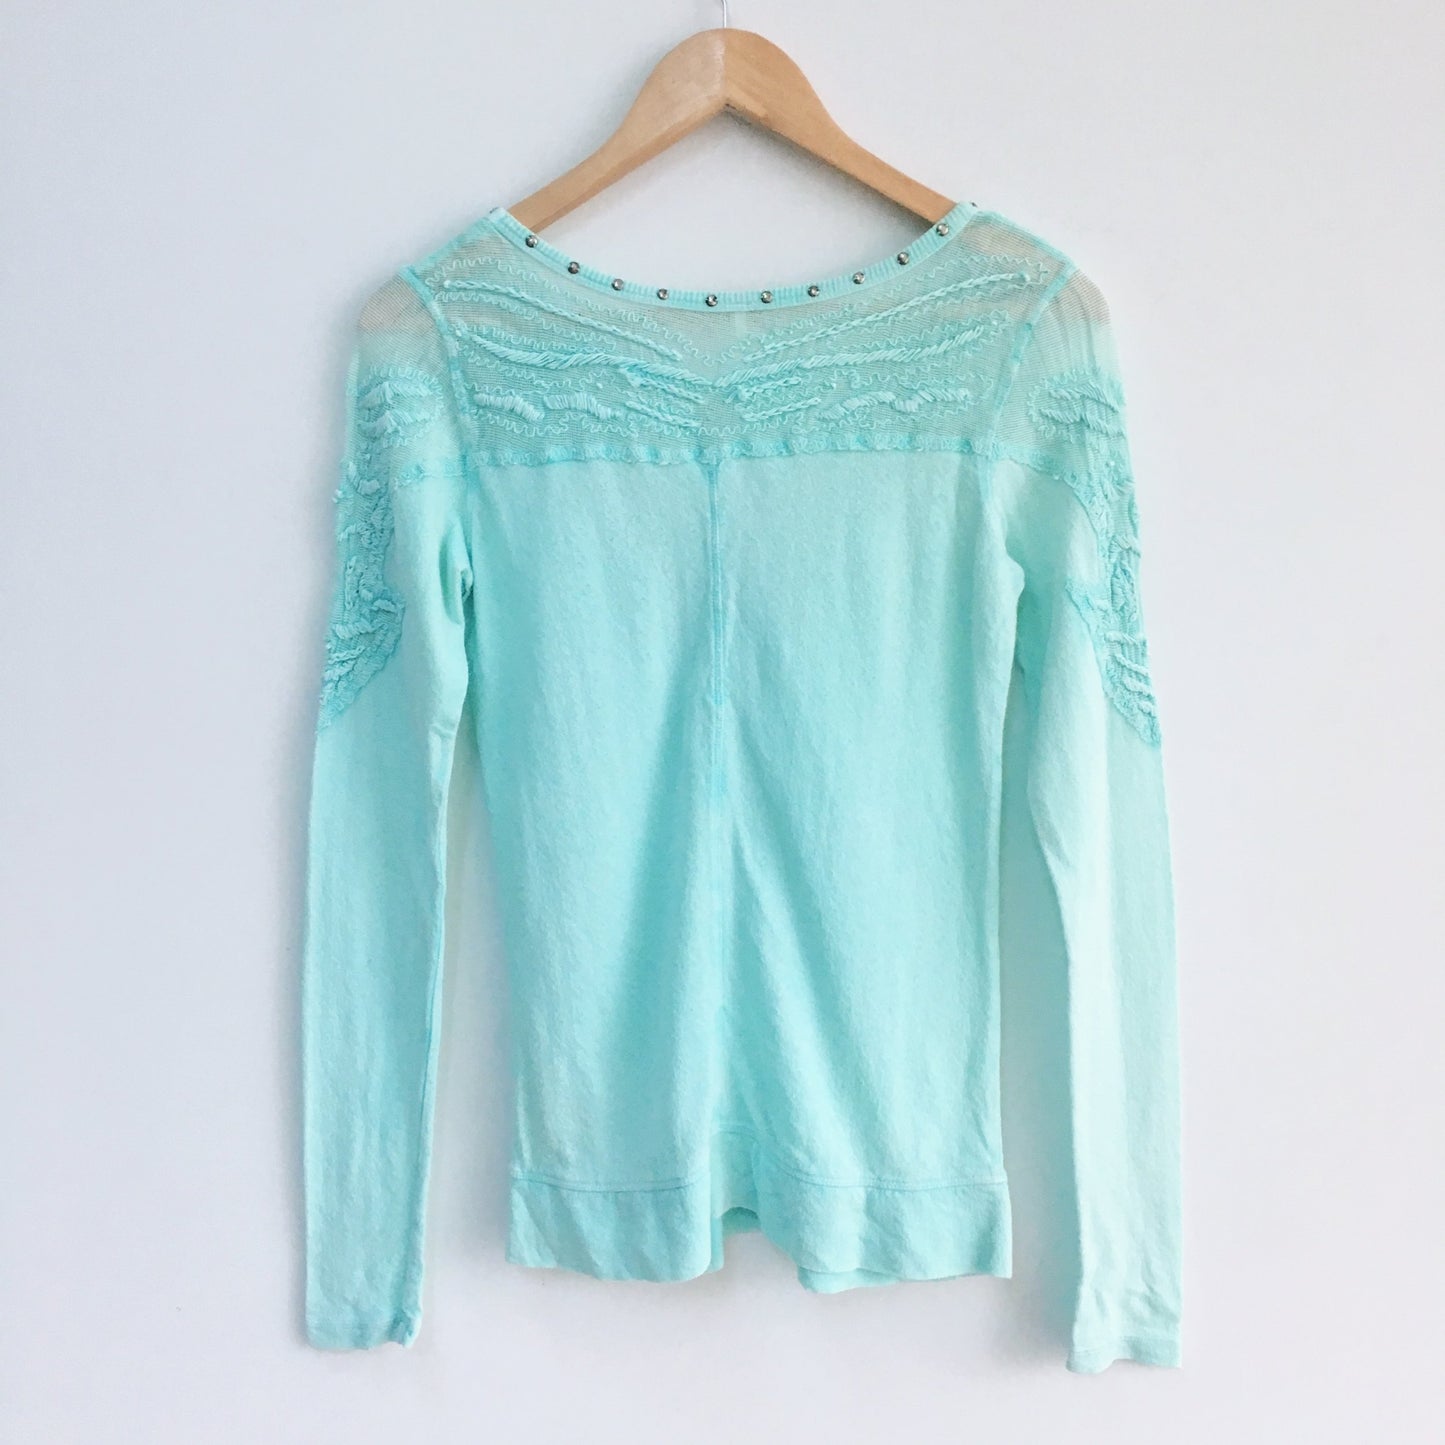 Free People Long Sleeve Top with Embroidery - Size XS